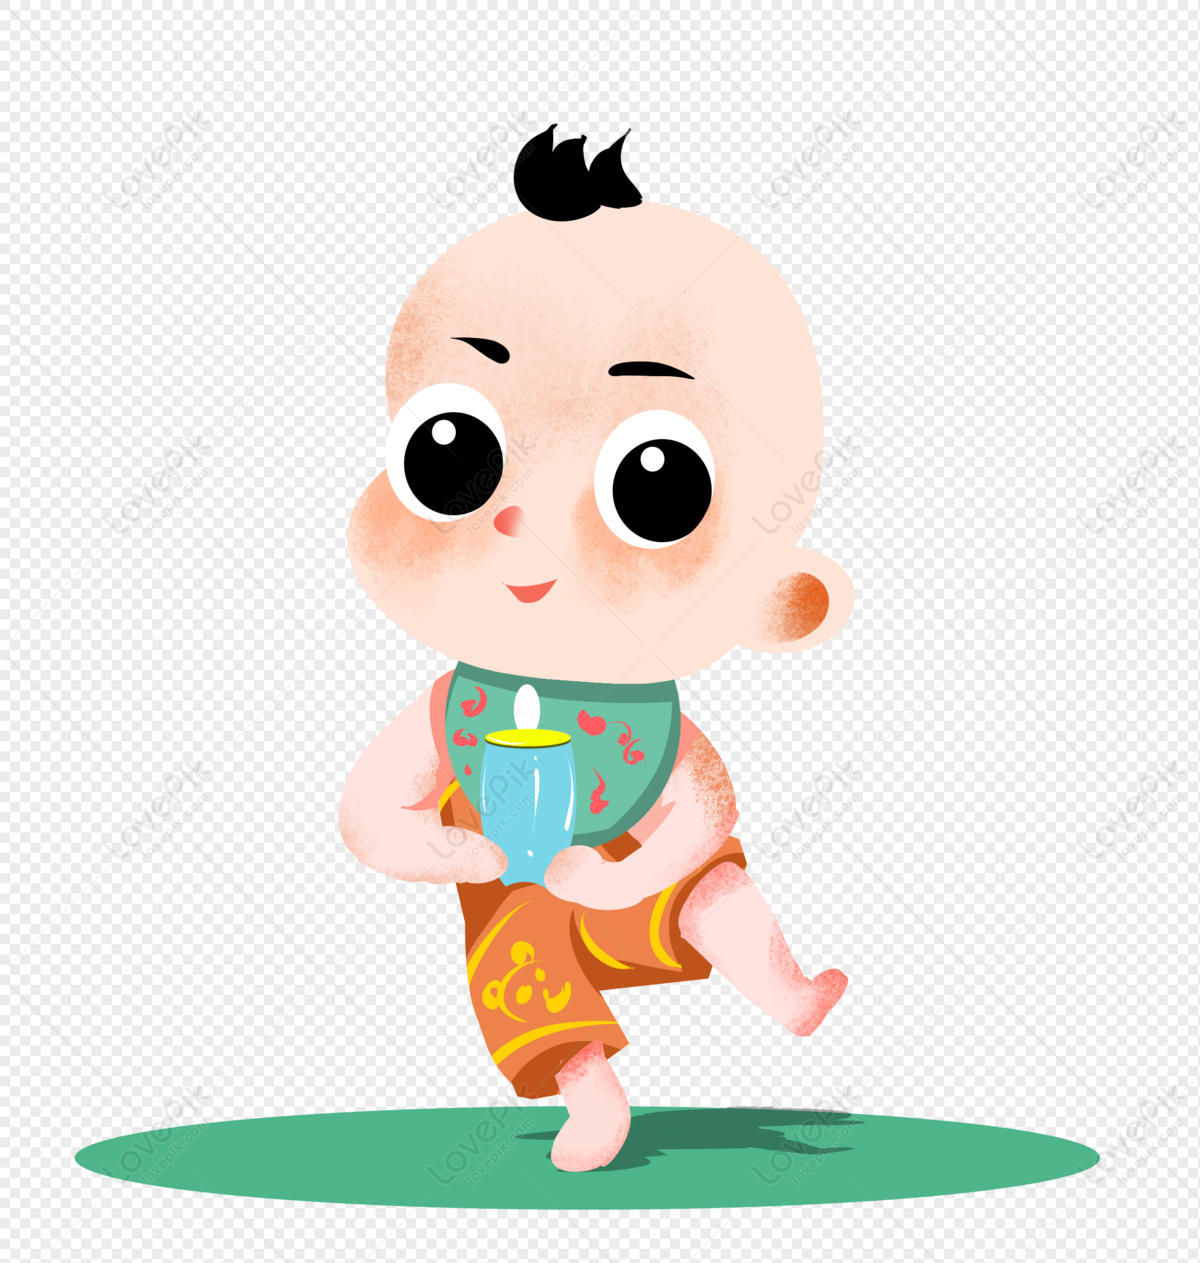 Baby Baby PNG Transparent And Clipart Image For Free Download - Lovepik |  401534126